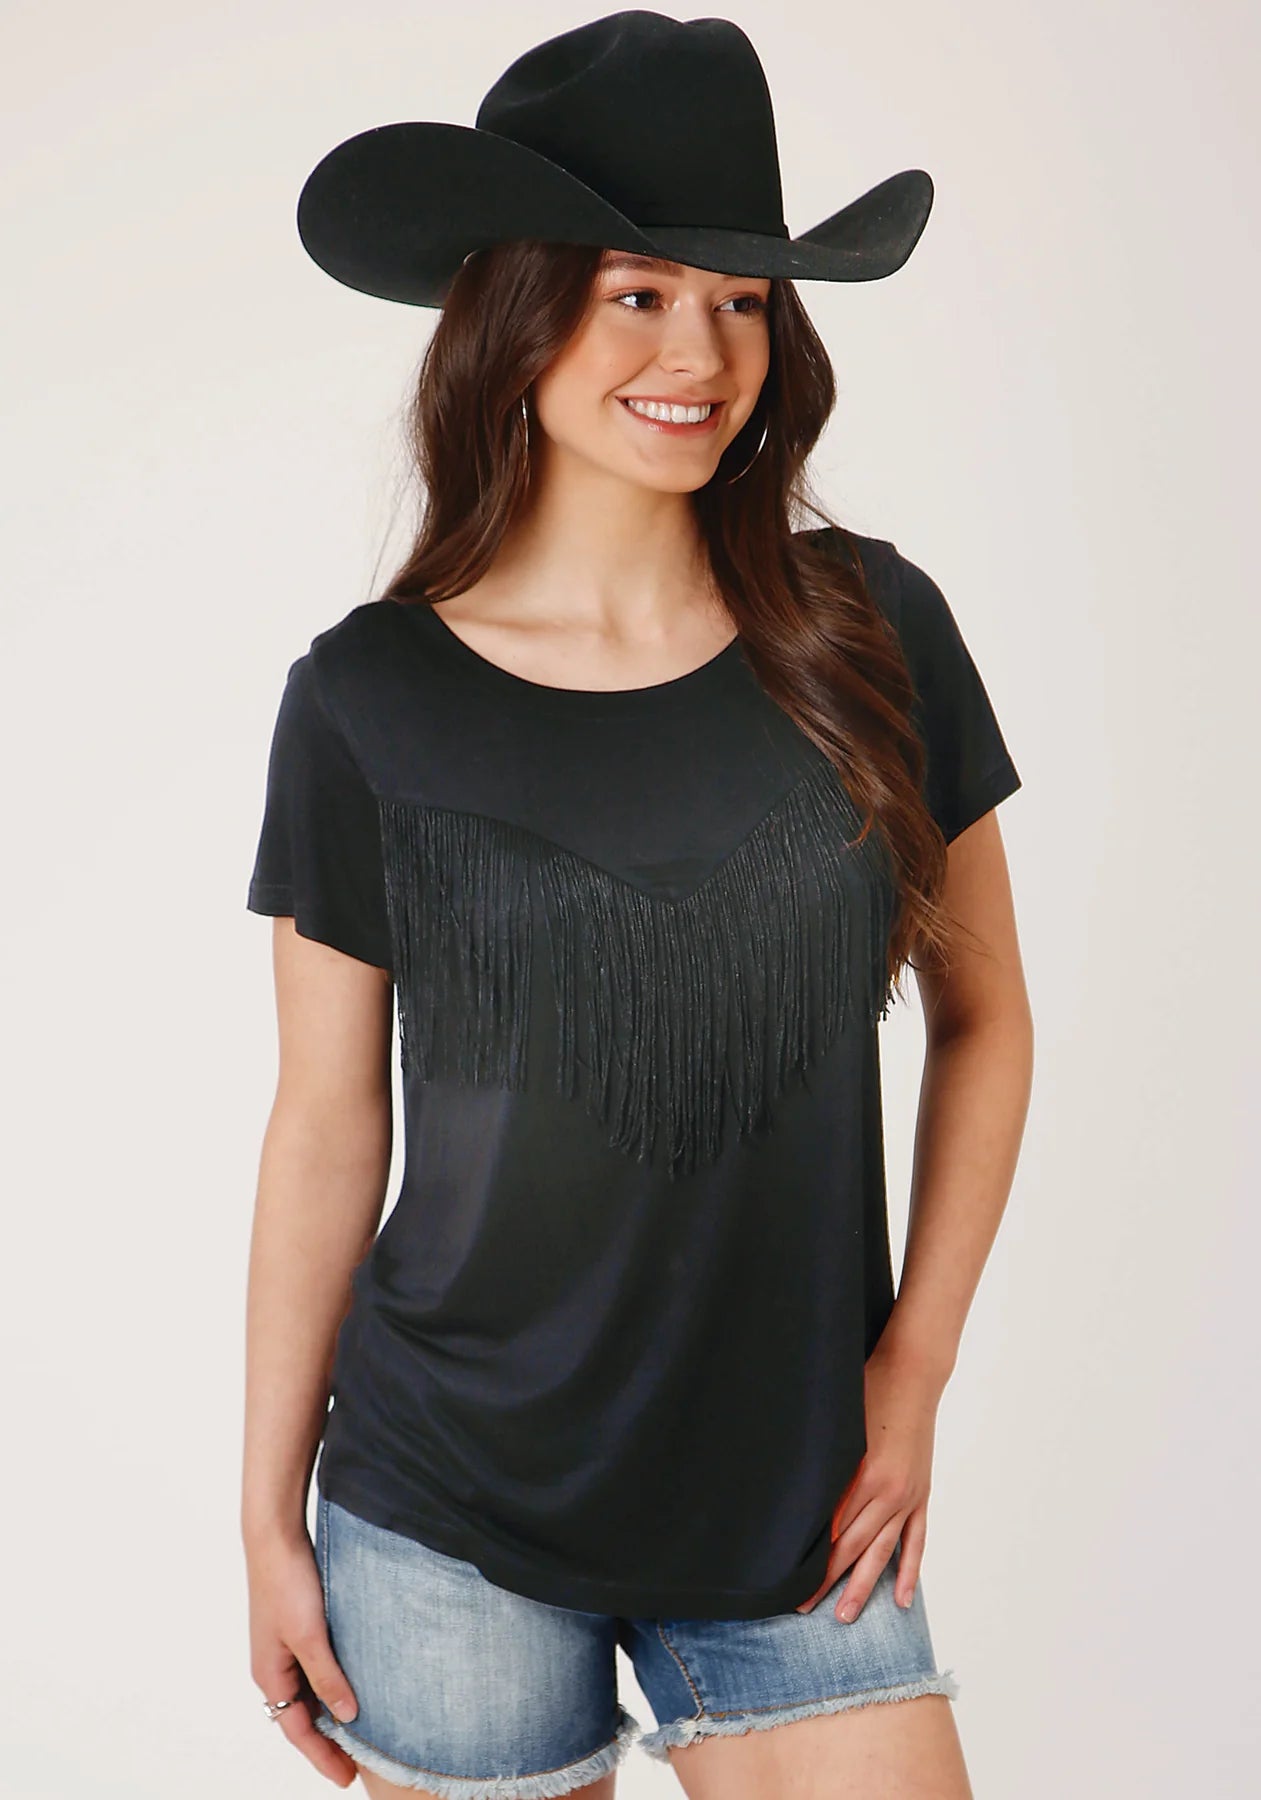 03-039-0514-2032 Roper Ladies Five Star Collection SS Tee Solid Black